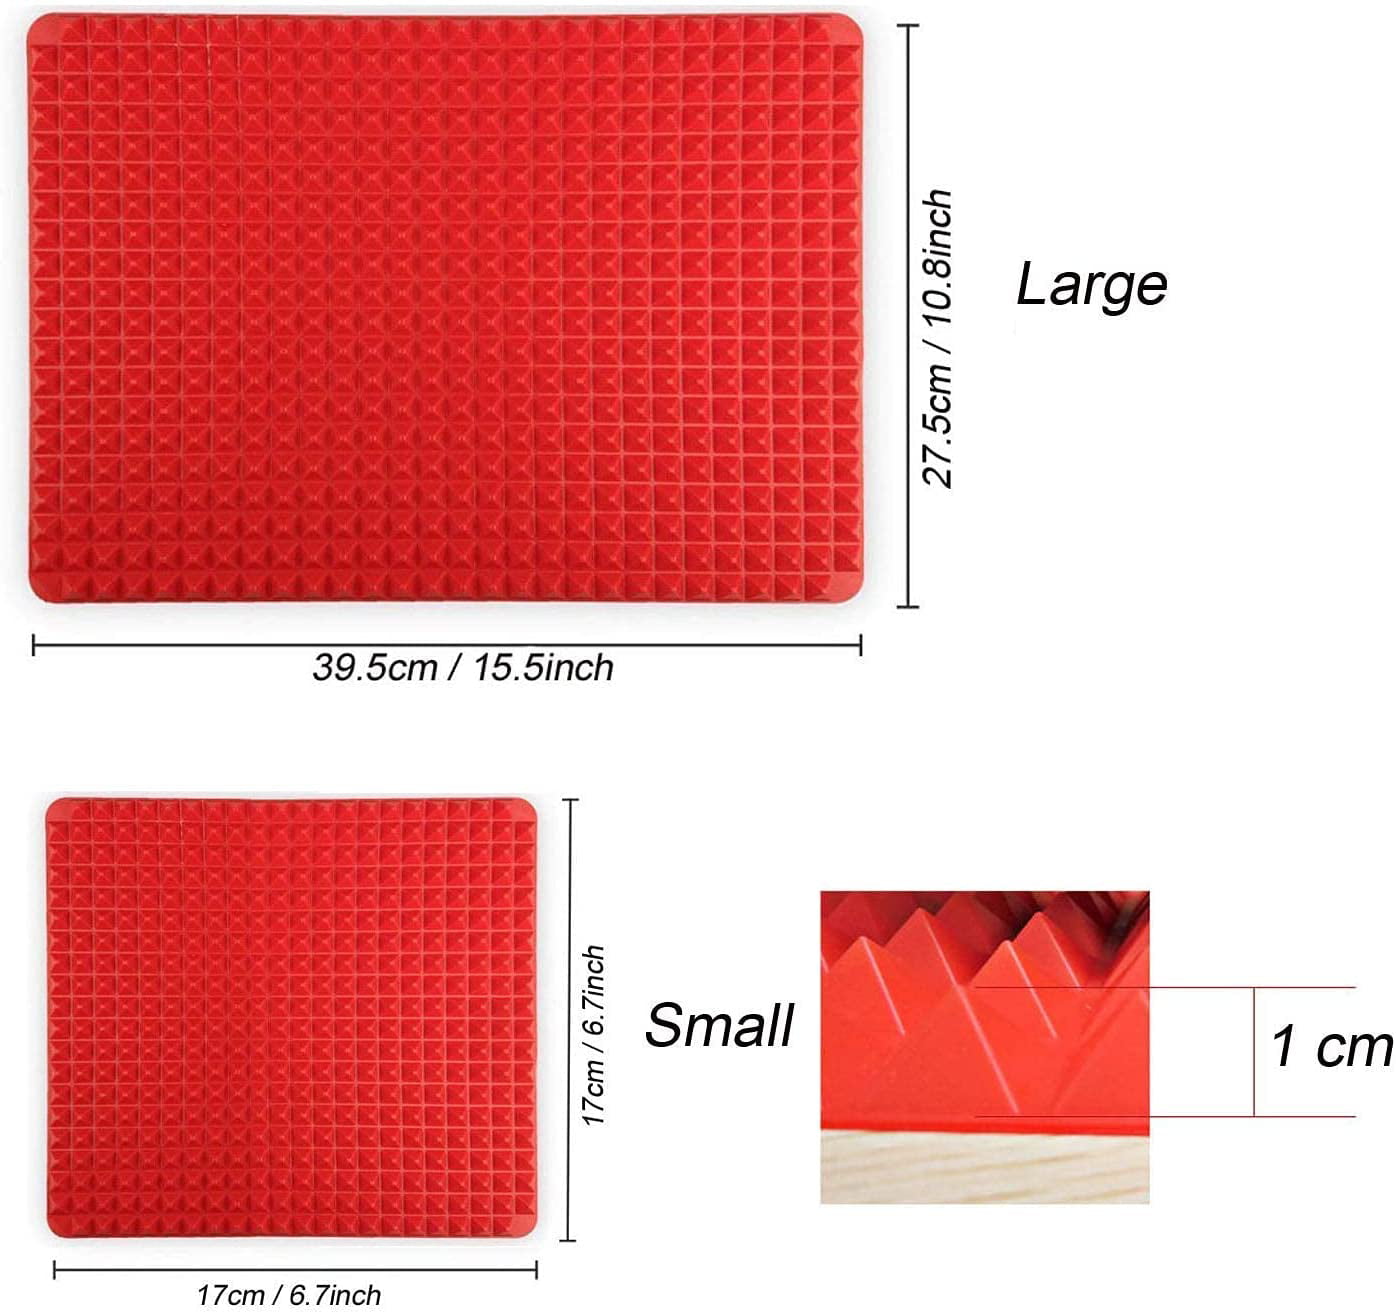 Silicone Baking Mat Cooking Pan 2 Pack Large 16“x11 Small 6.7x6.7  Non-Stick Healthy Fat Reducing Sheet For Oven Grilling BBQ (2 Pack-Red  Large)